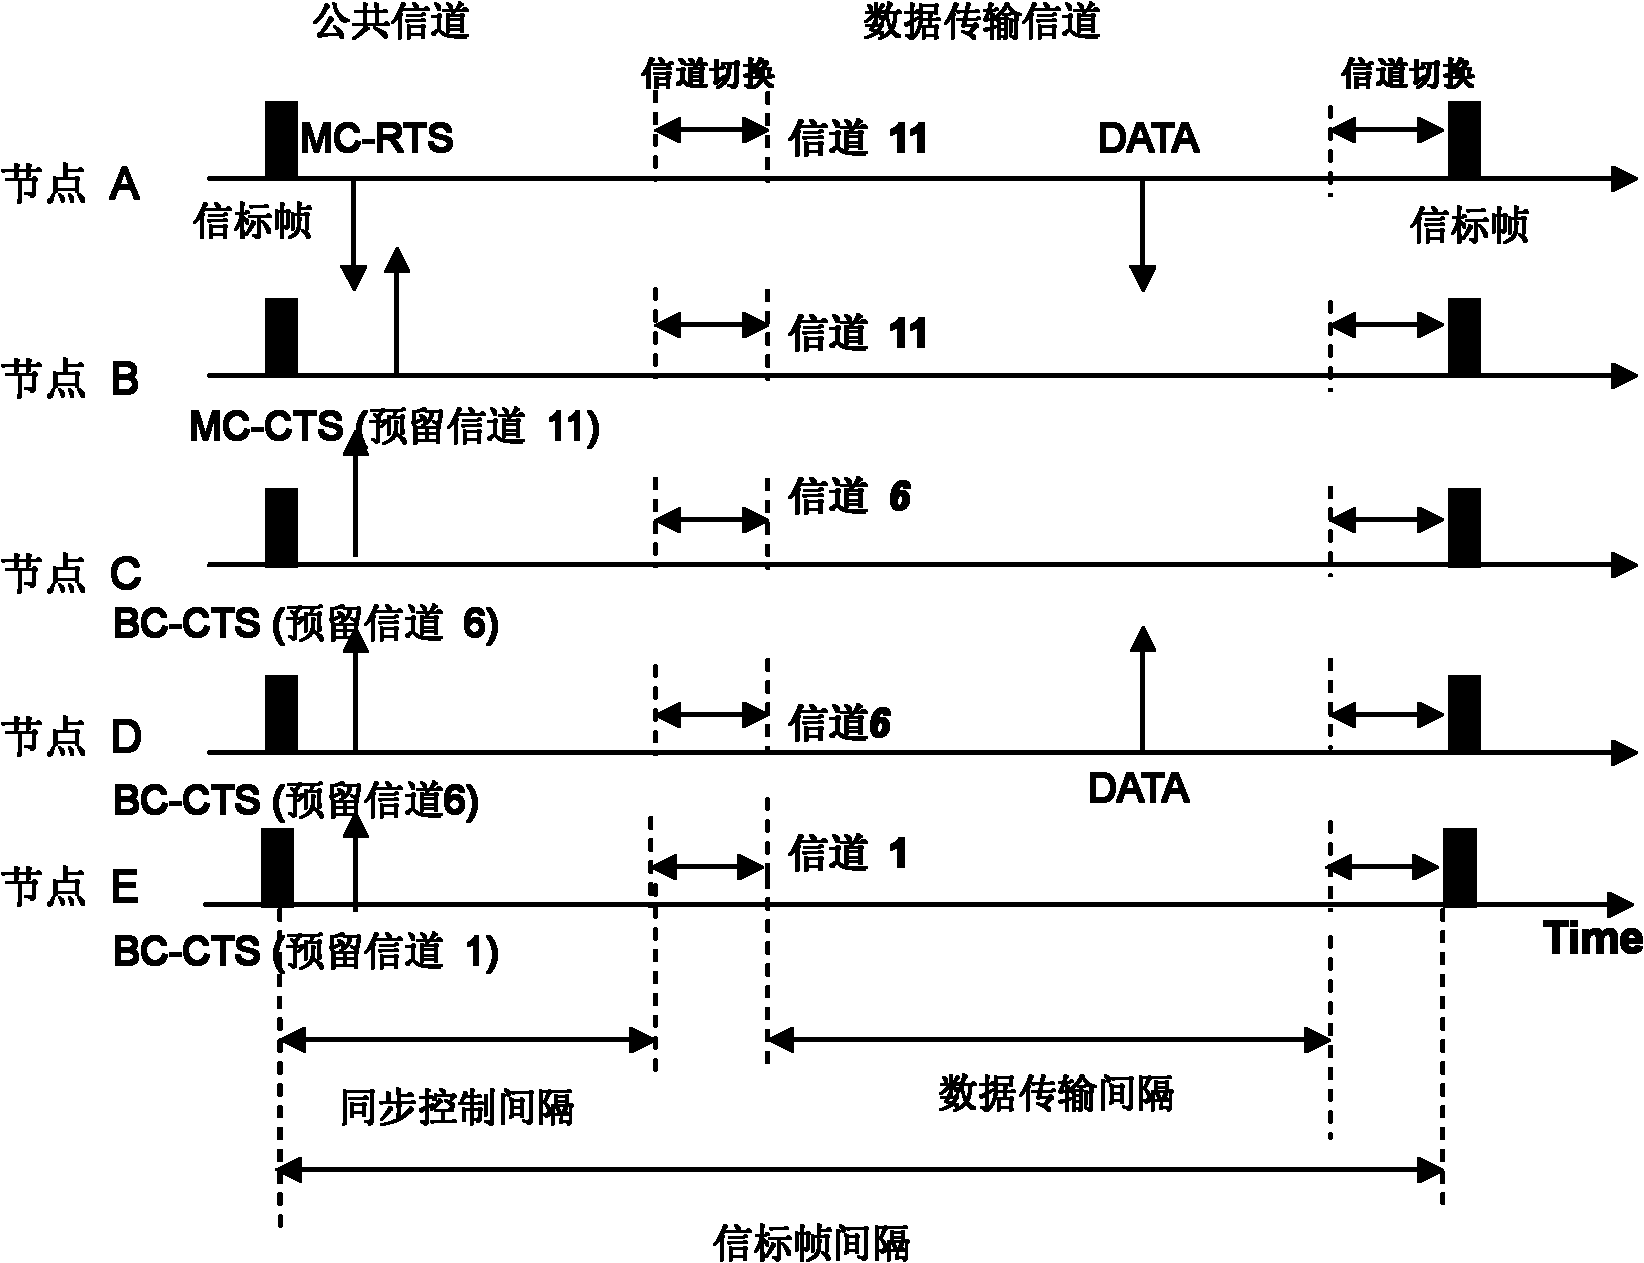 Method based on multi-channel medium access control protocol in ad hoc network